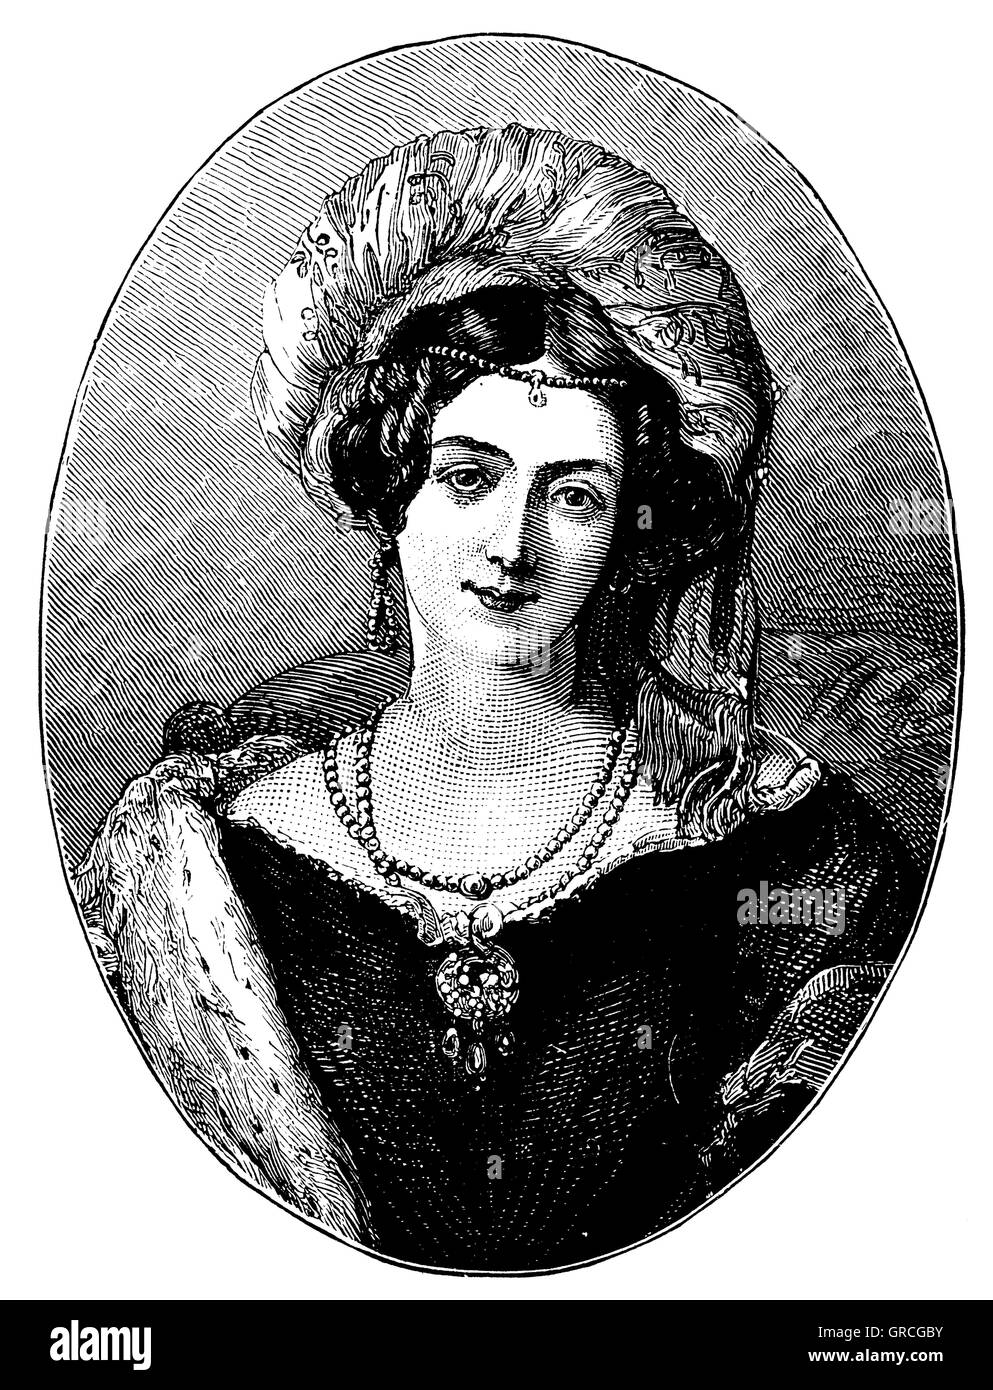 Duchess of Kent. From Engraving by Messrs. P. & D. Colnagei & Co. Stock Photo